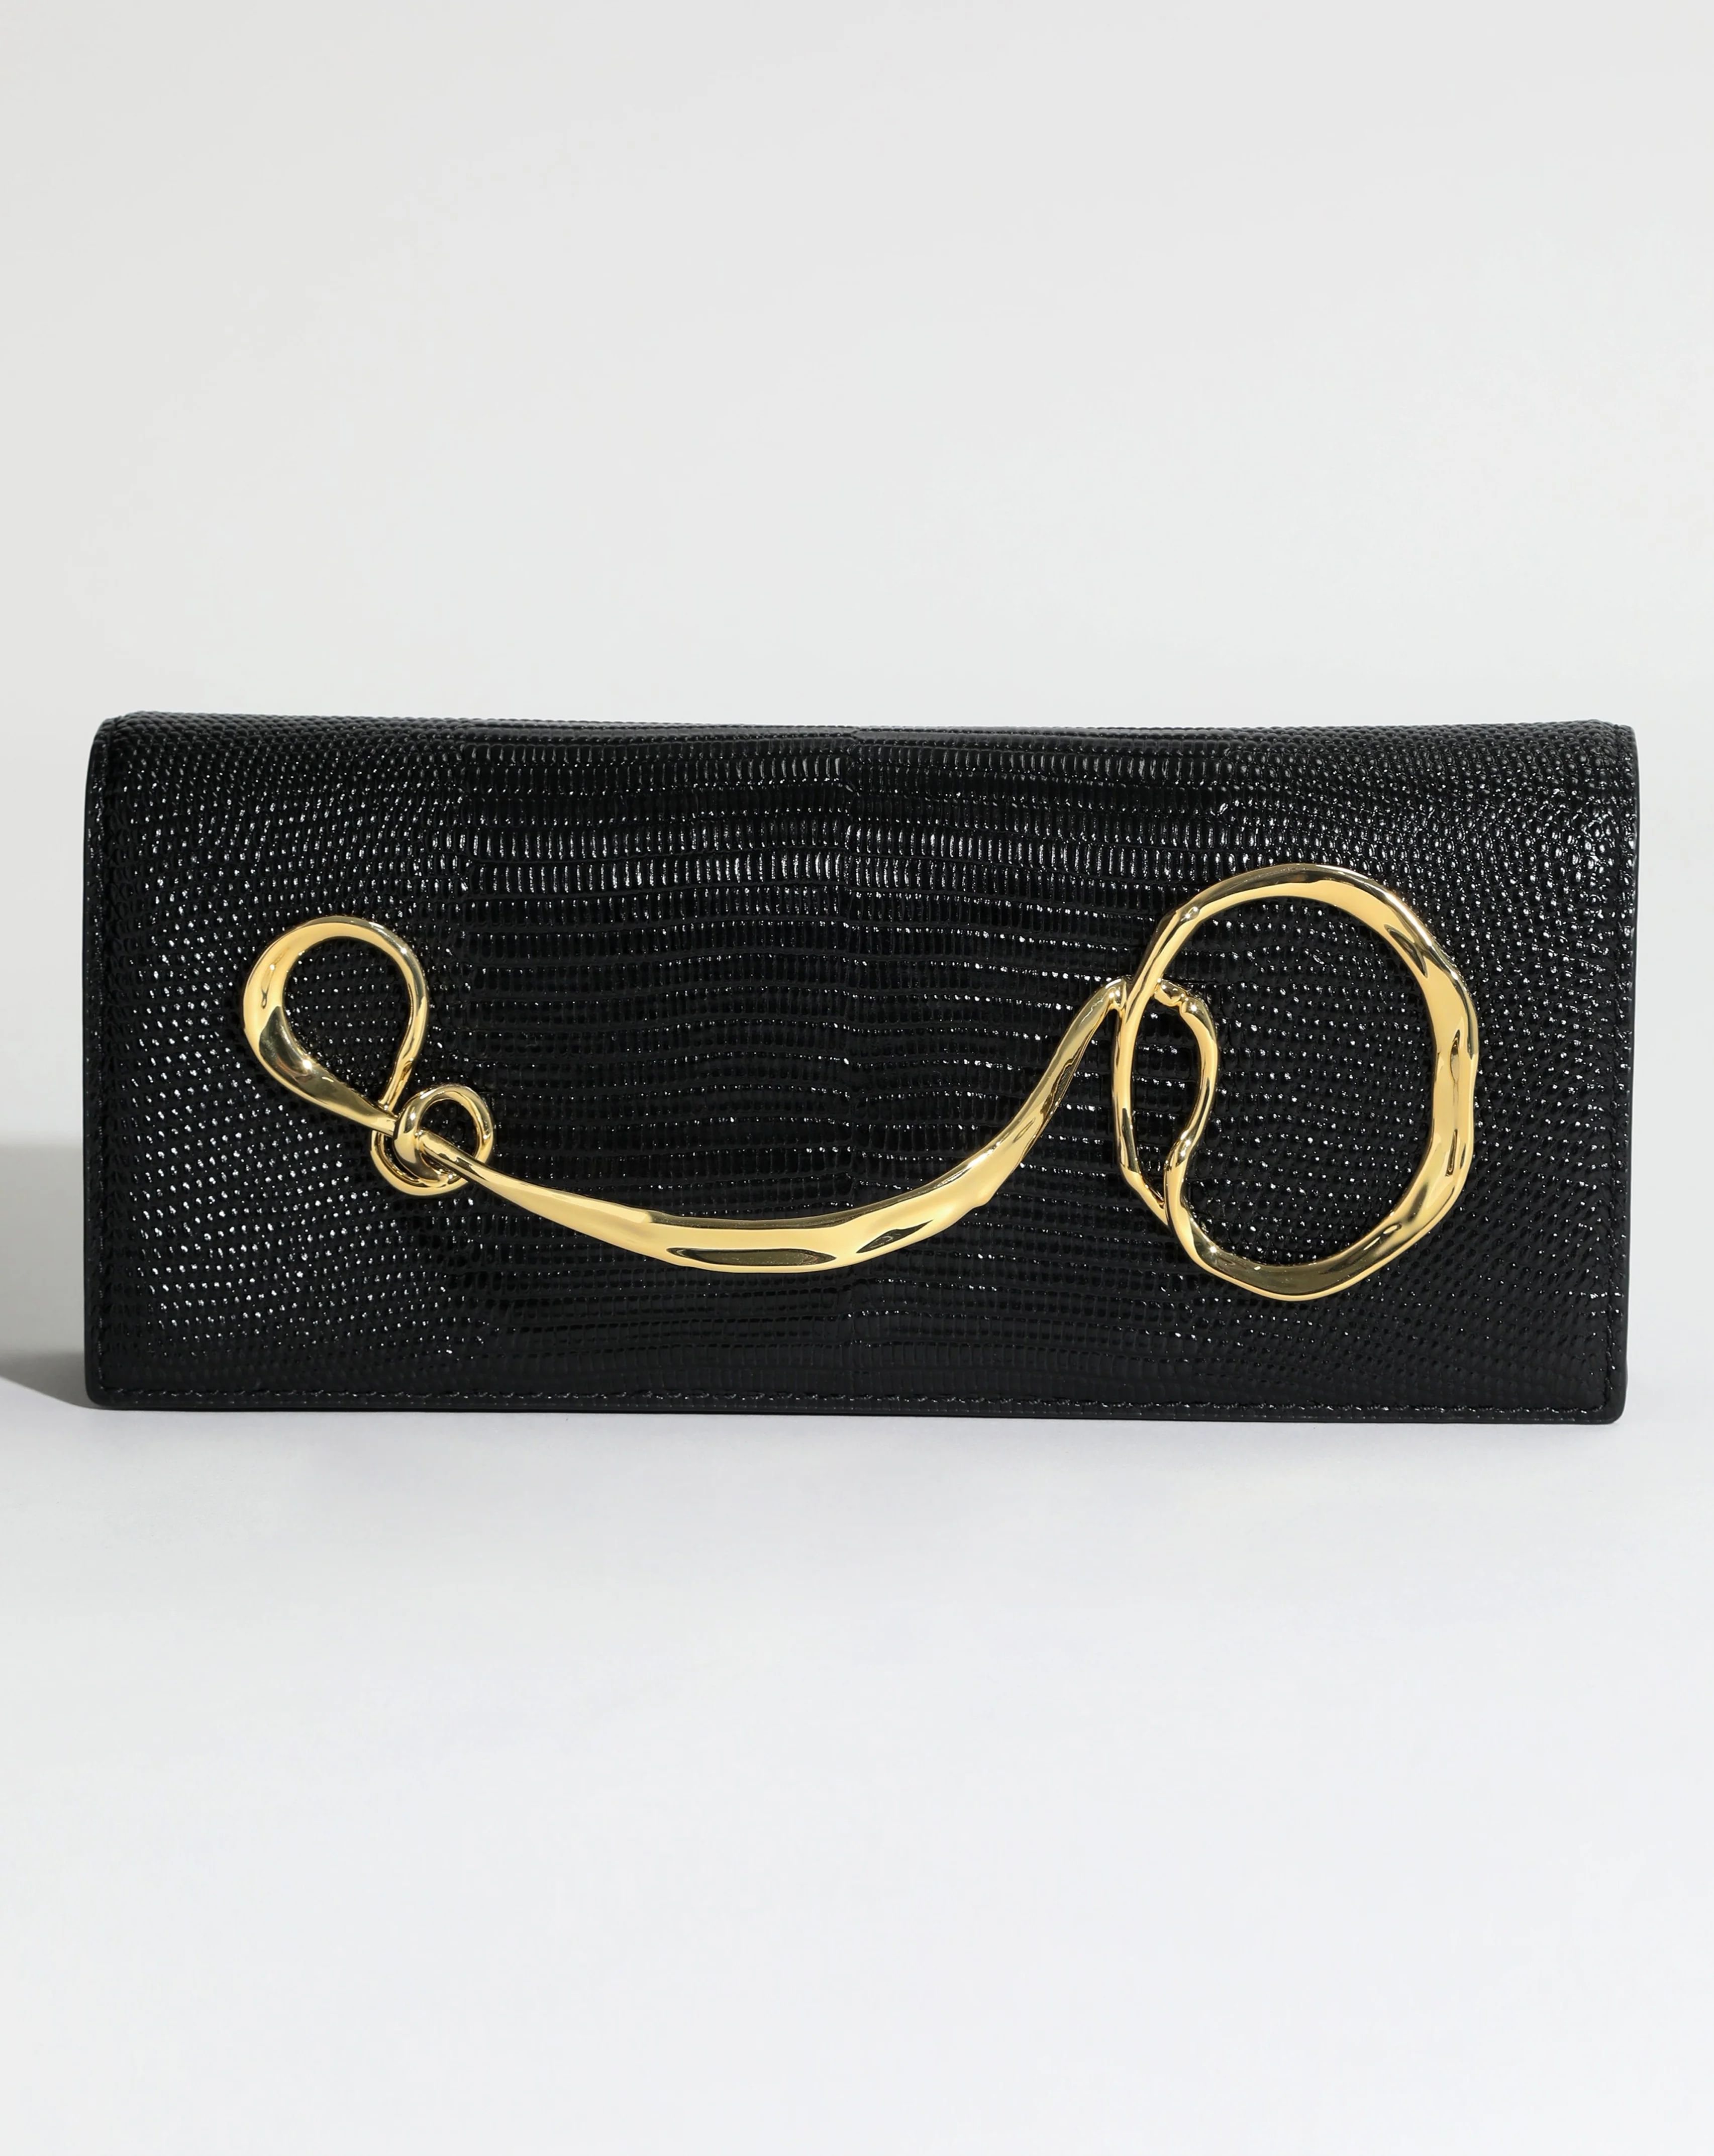 Twisted Gold Black Leather Clutch – ALEXIS BITTAR | Alexis Bittar